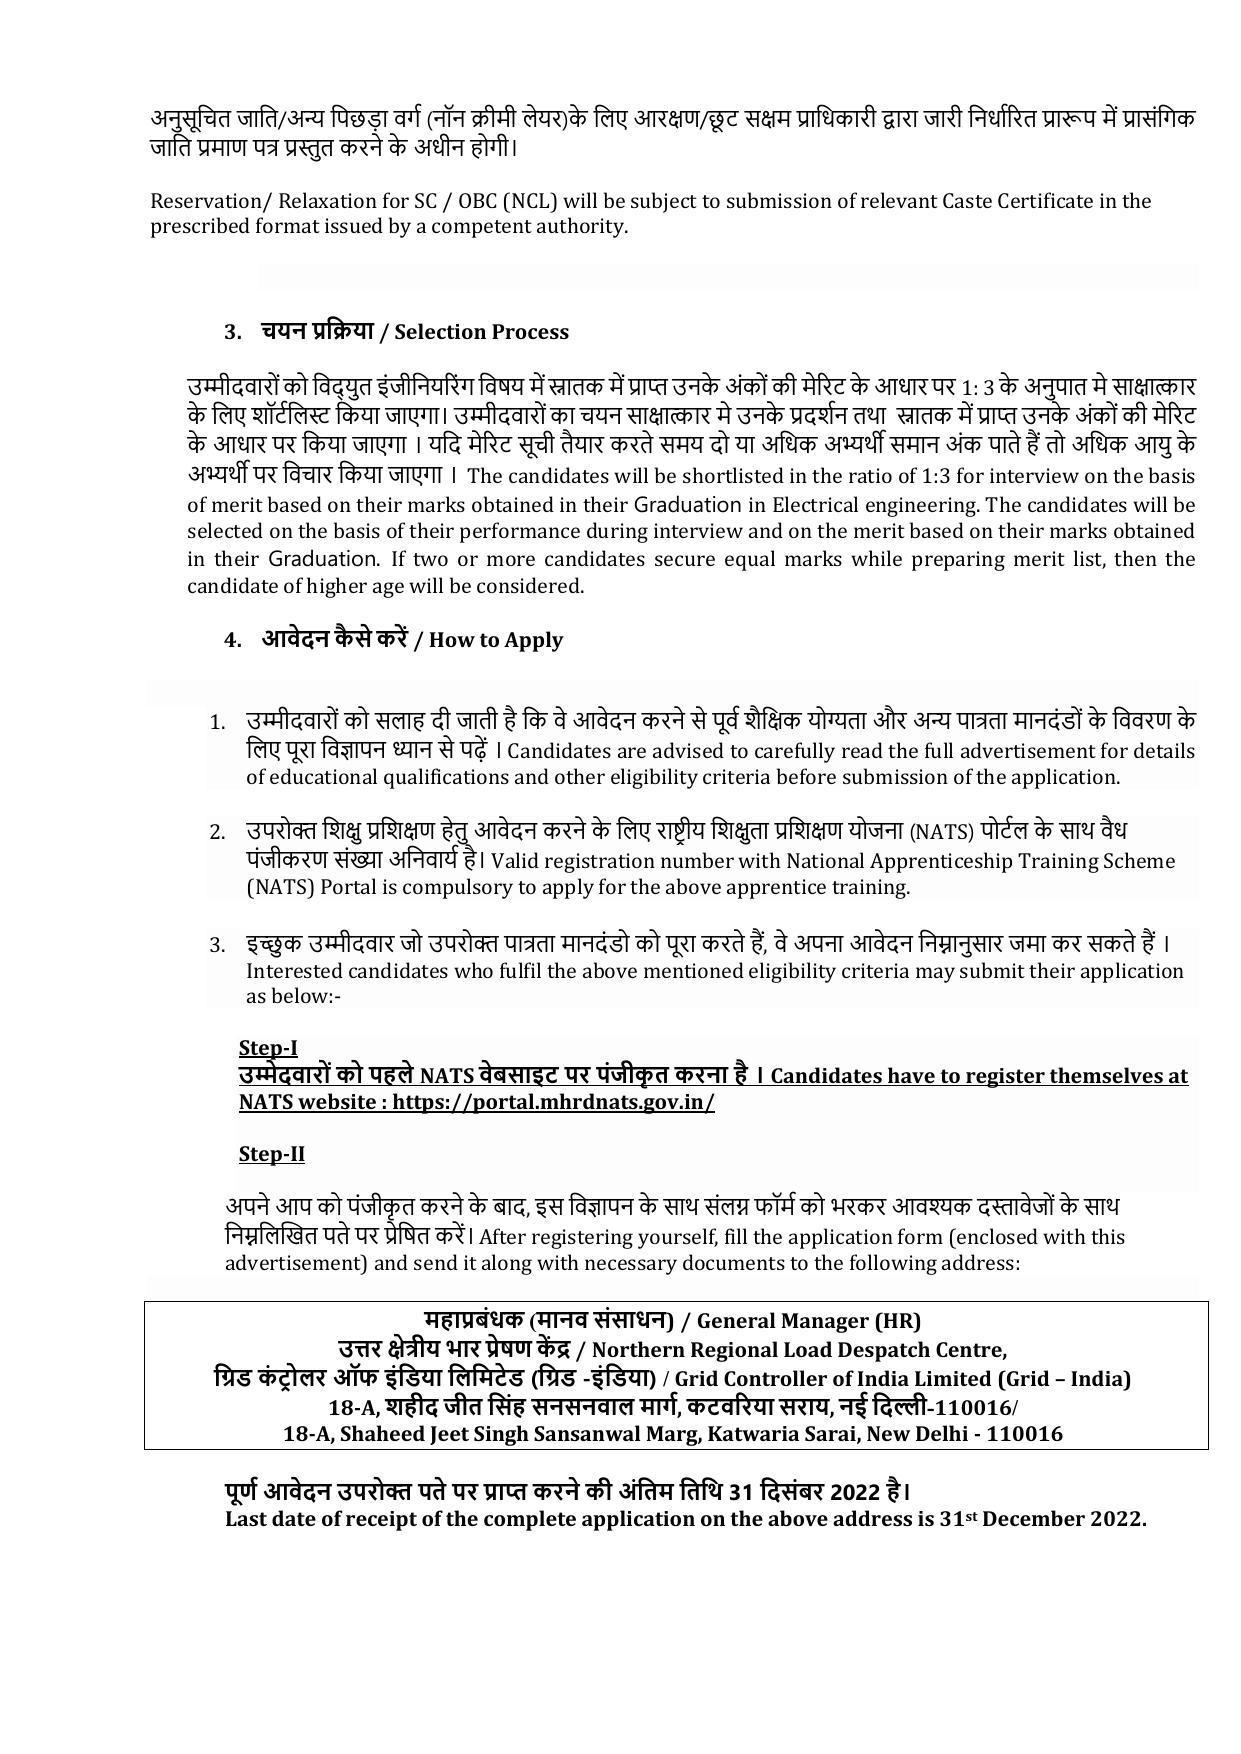 Grid Controller of India Limited (POSOCO) Invites Application for Graduate Apprentice Recruitment 2022 - Page 2